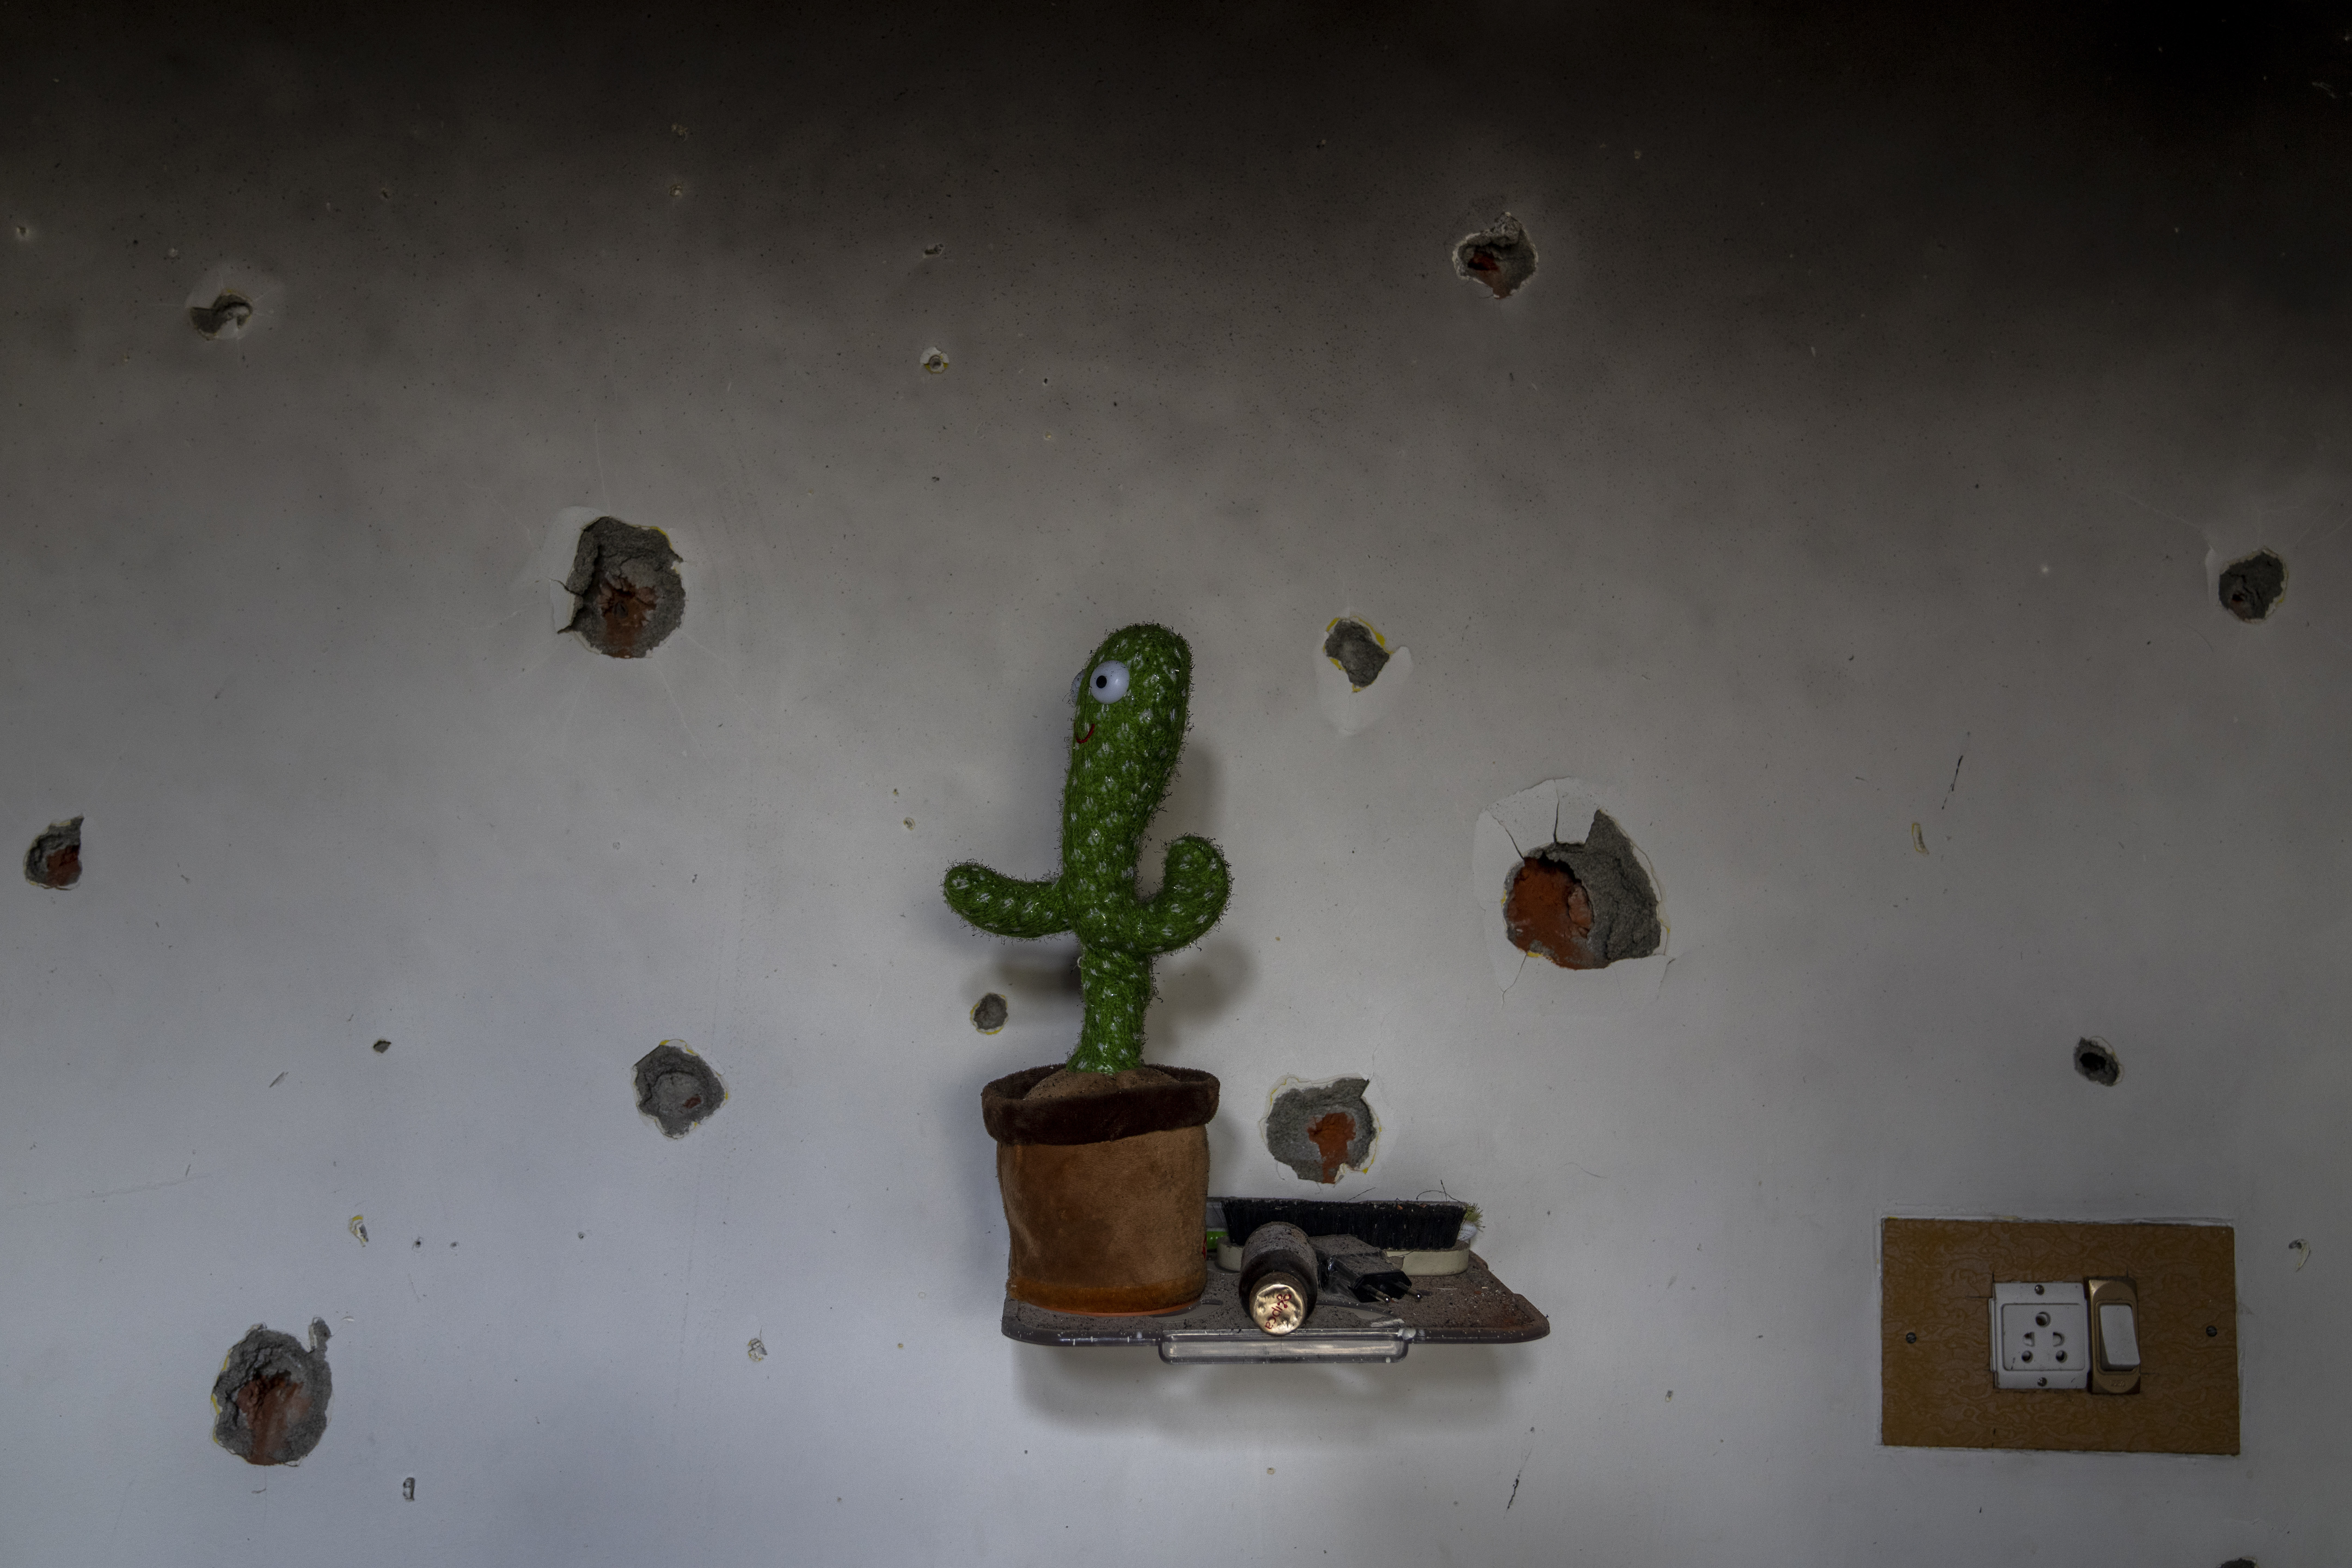 A bullet-riddled wall.